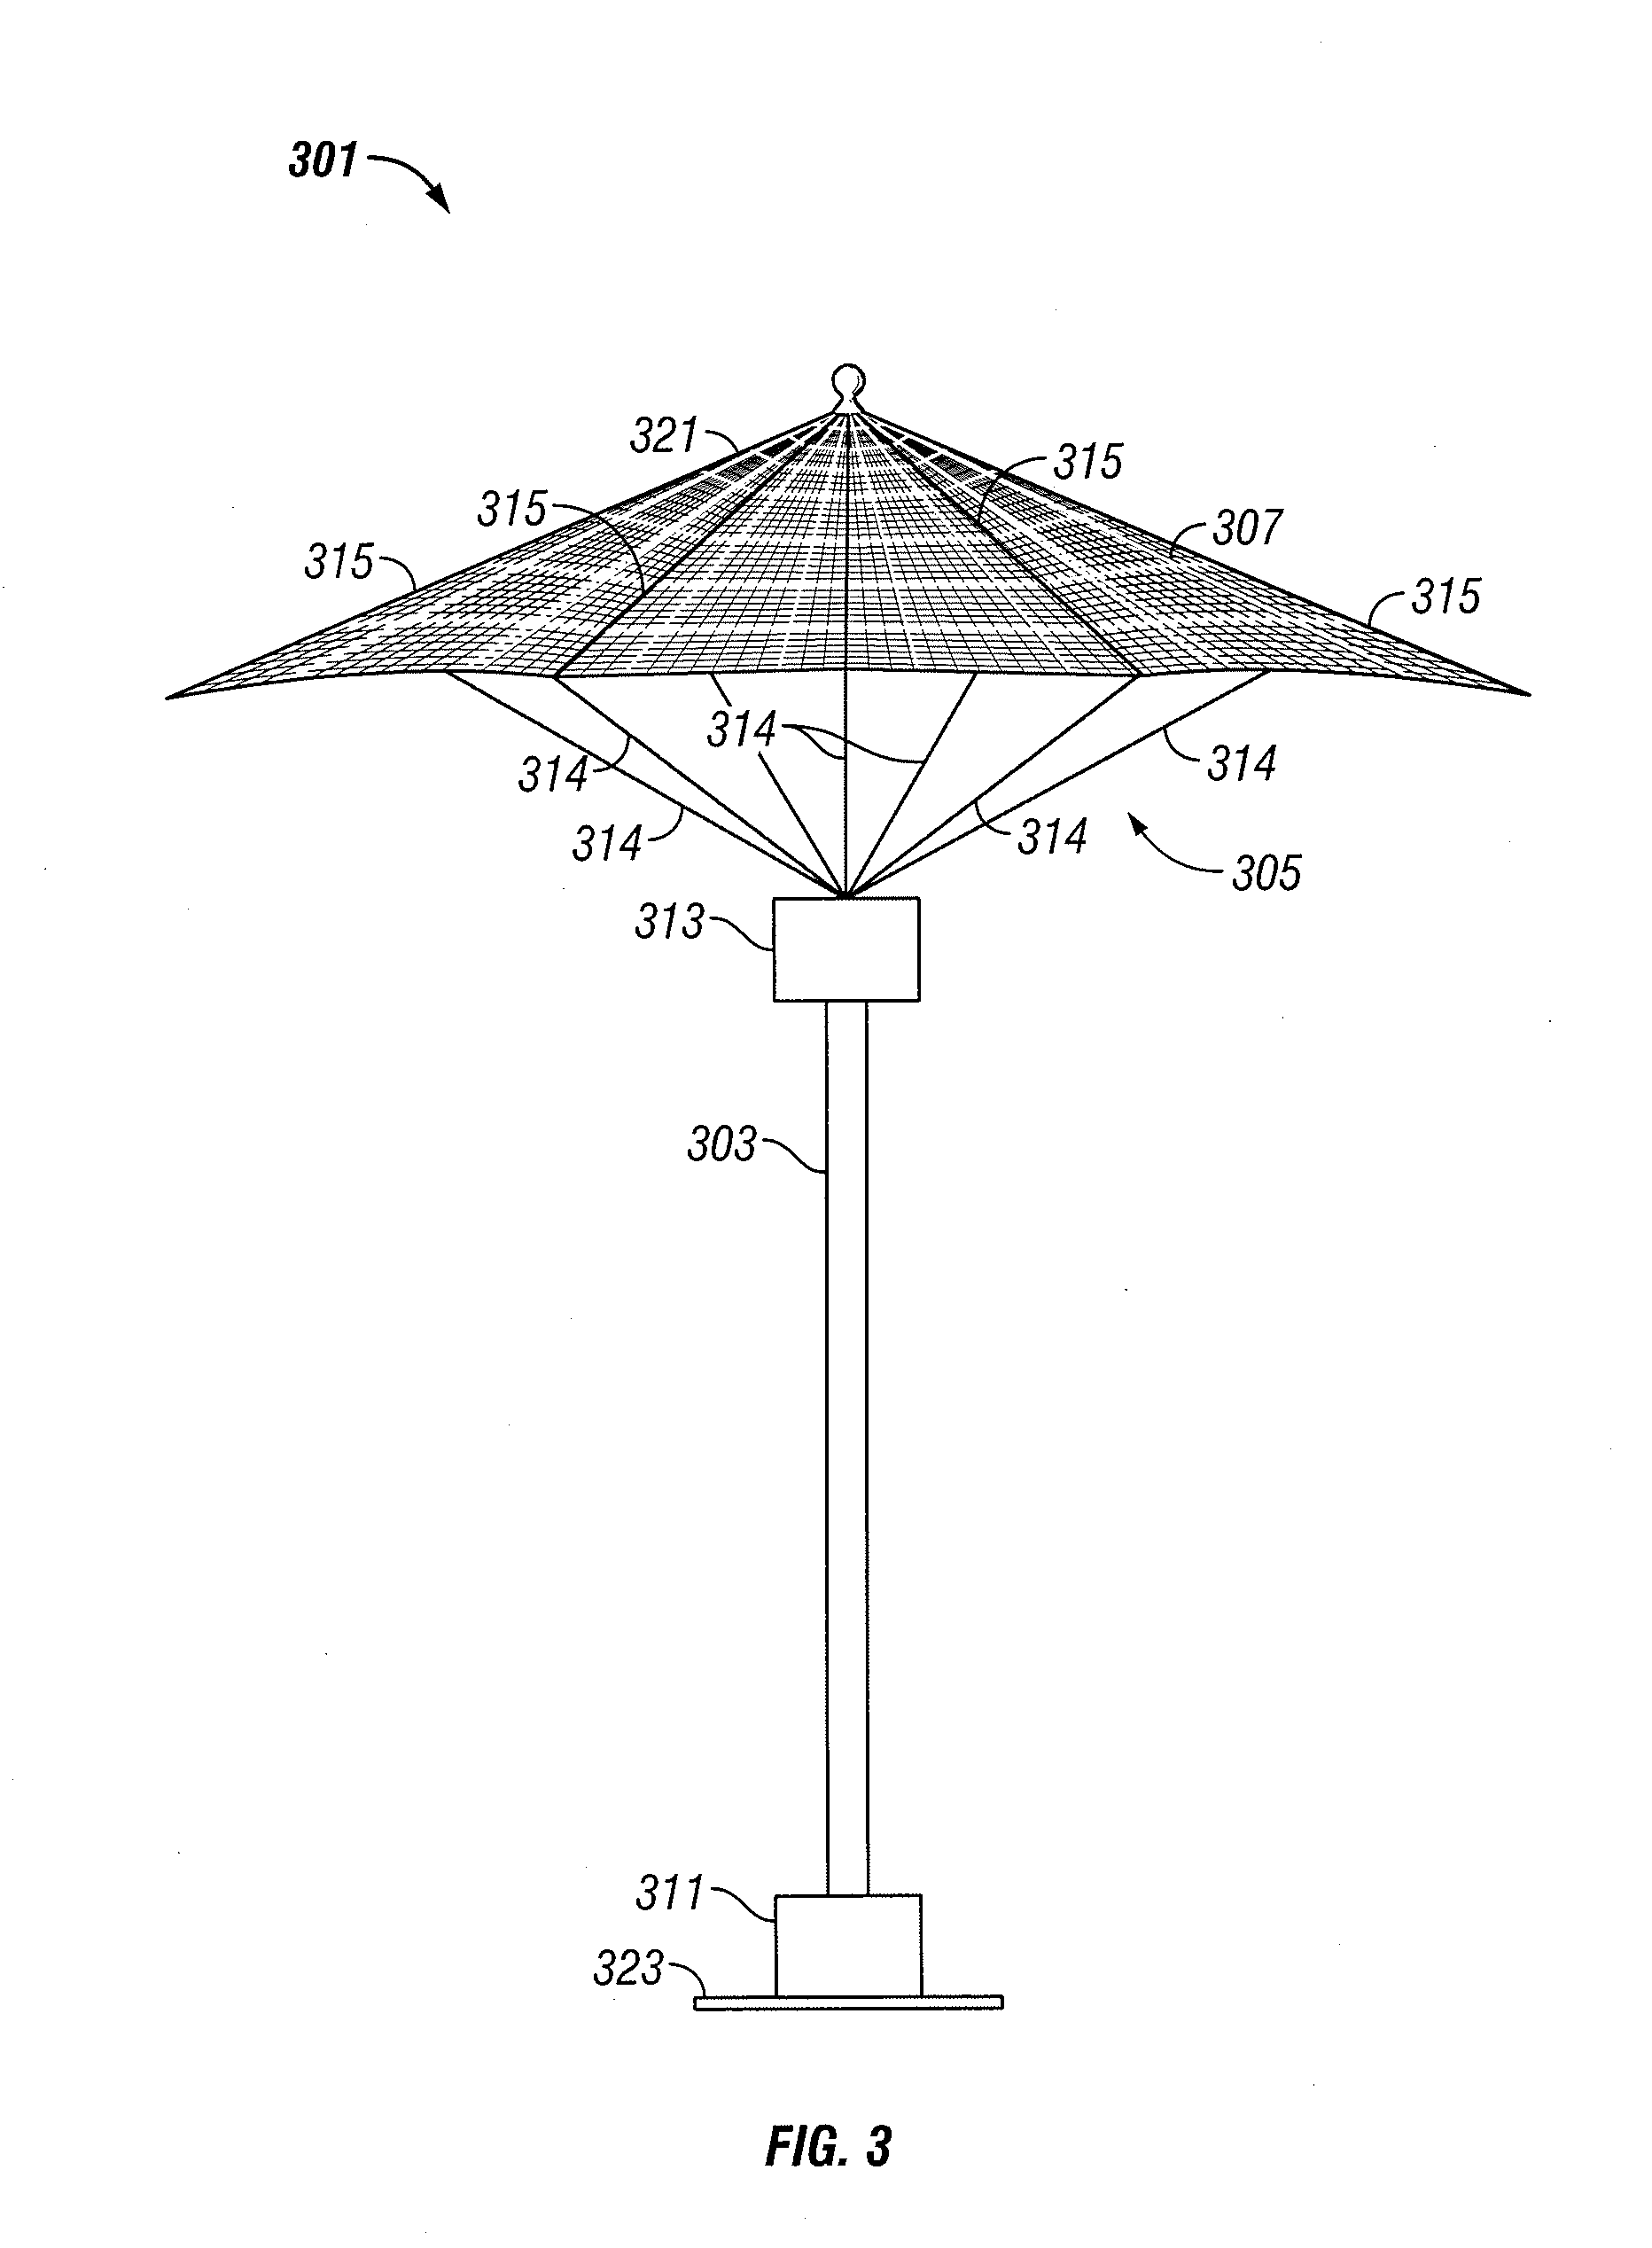 Outdoor umbrella system with integrated solar power supply